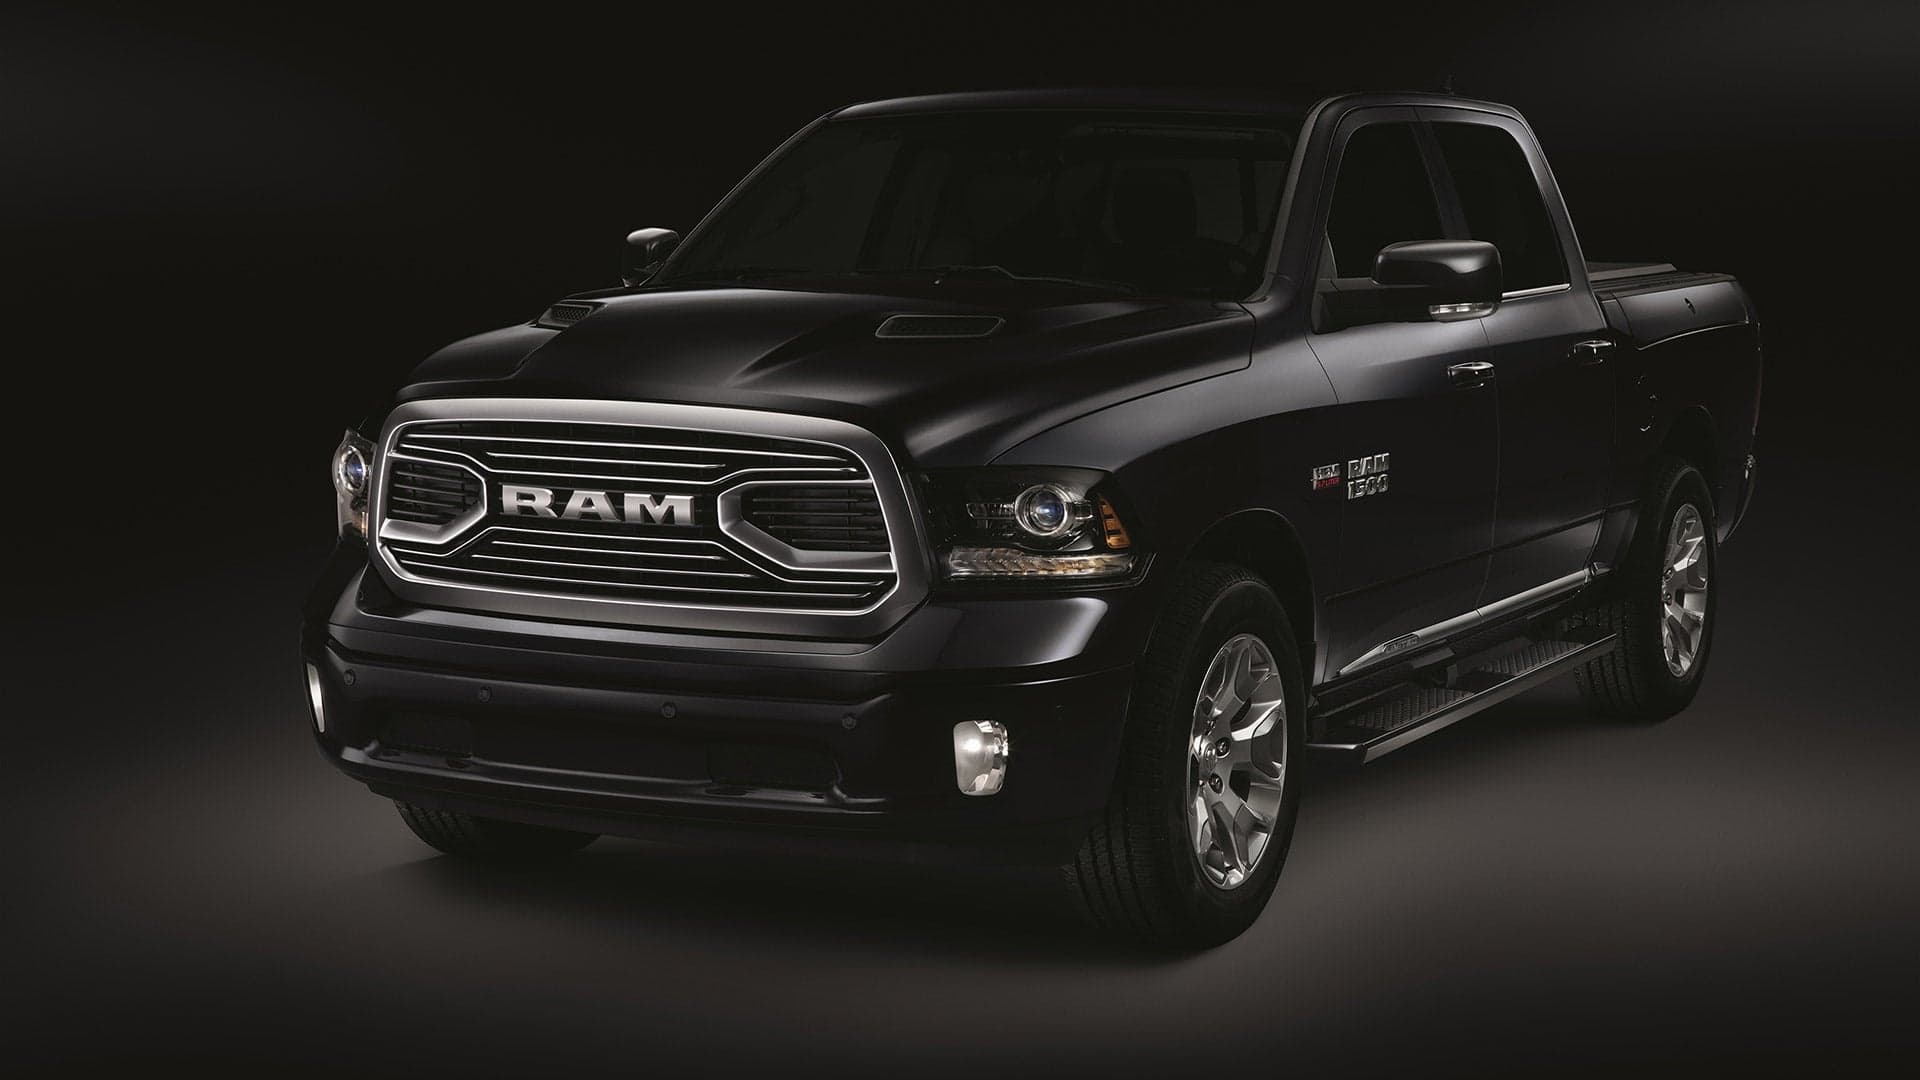 Diesel Ram Truck Production Resumes, Report Says